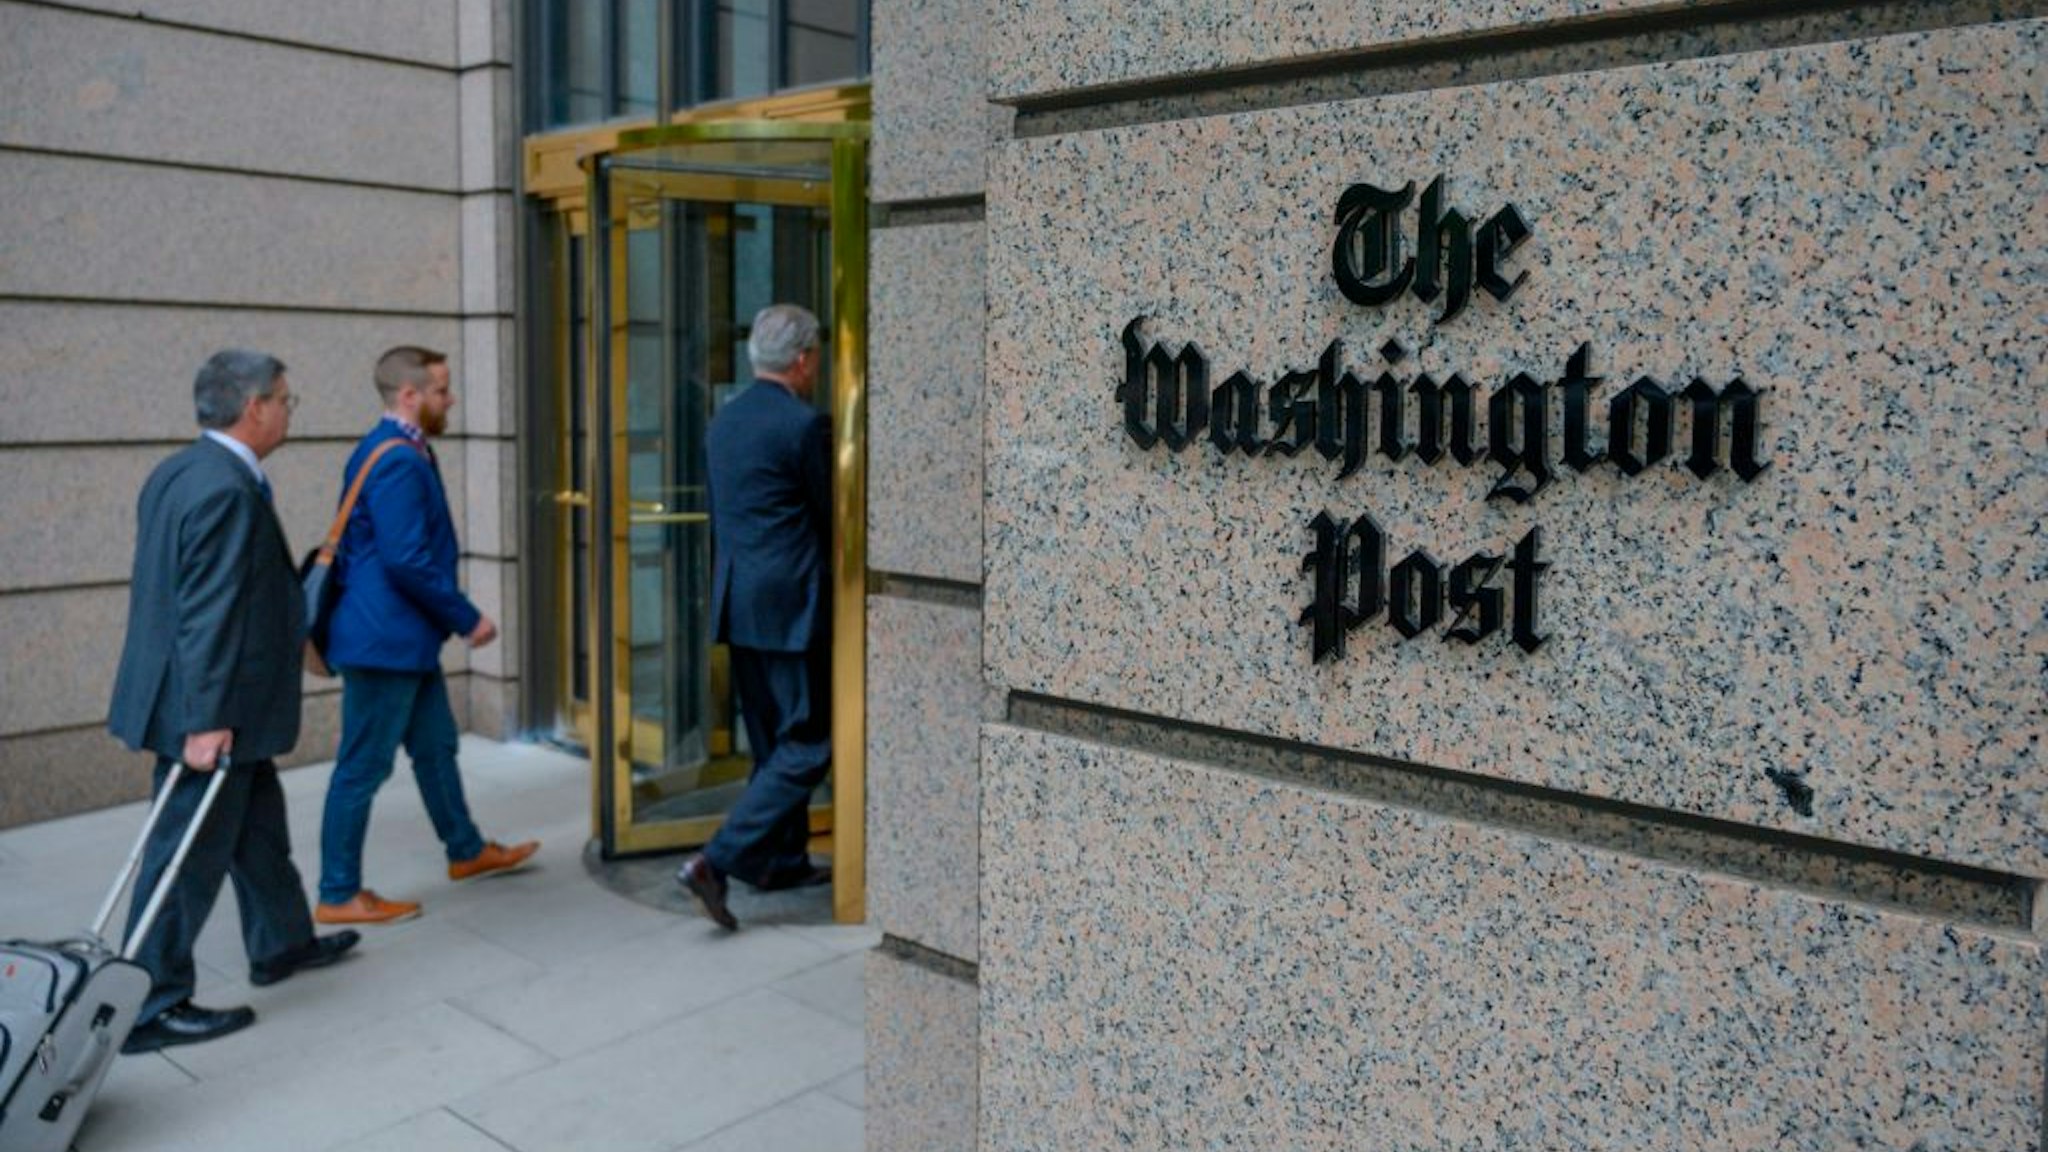 TOPSHOT - The building of the Washington Post newspaper headquarter is seen on K Street in Washington DC on May 16, 2019. - The Washington Post is a major American daily newspaper published in Washington, D.C., with a particular emphasis on national politics and the federal government. It has the largest circulation in the Washington metropolitan area. (Photo by Eric BARADAT / AFP)